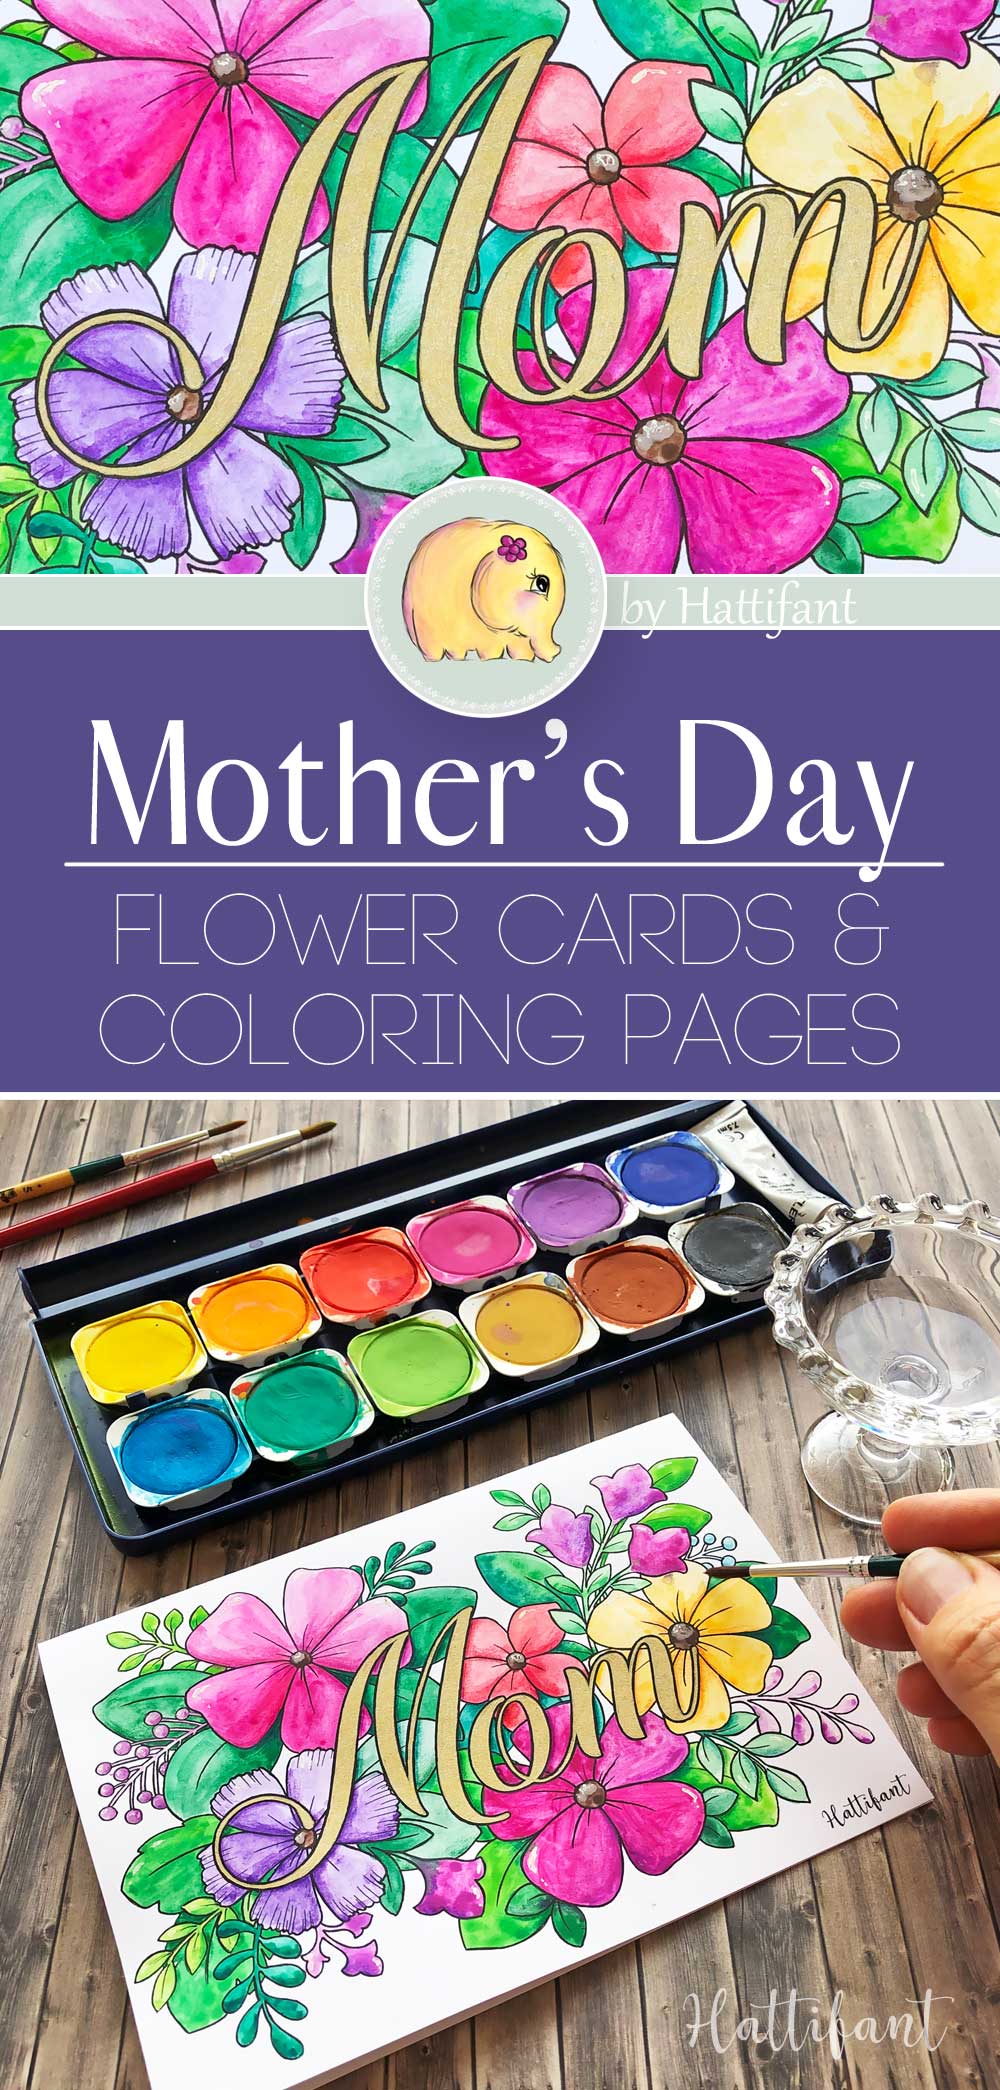 Hattifant's Mother's Day Flower Cards and Coloring Pages